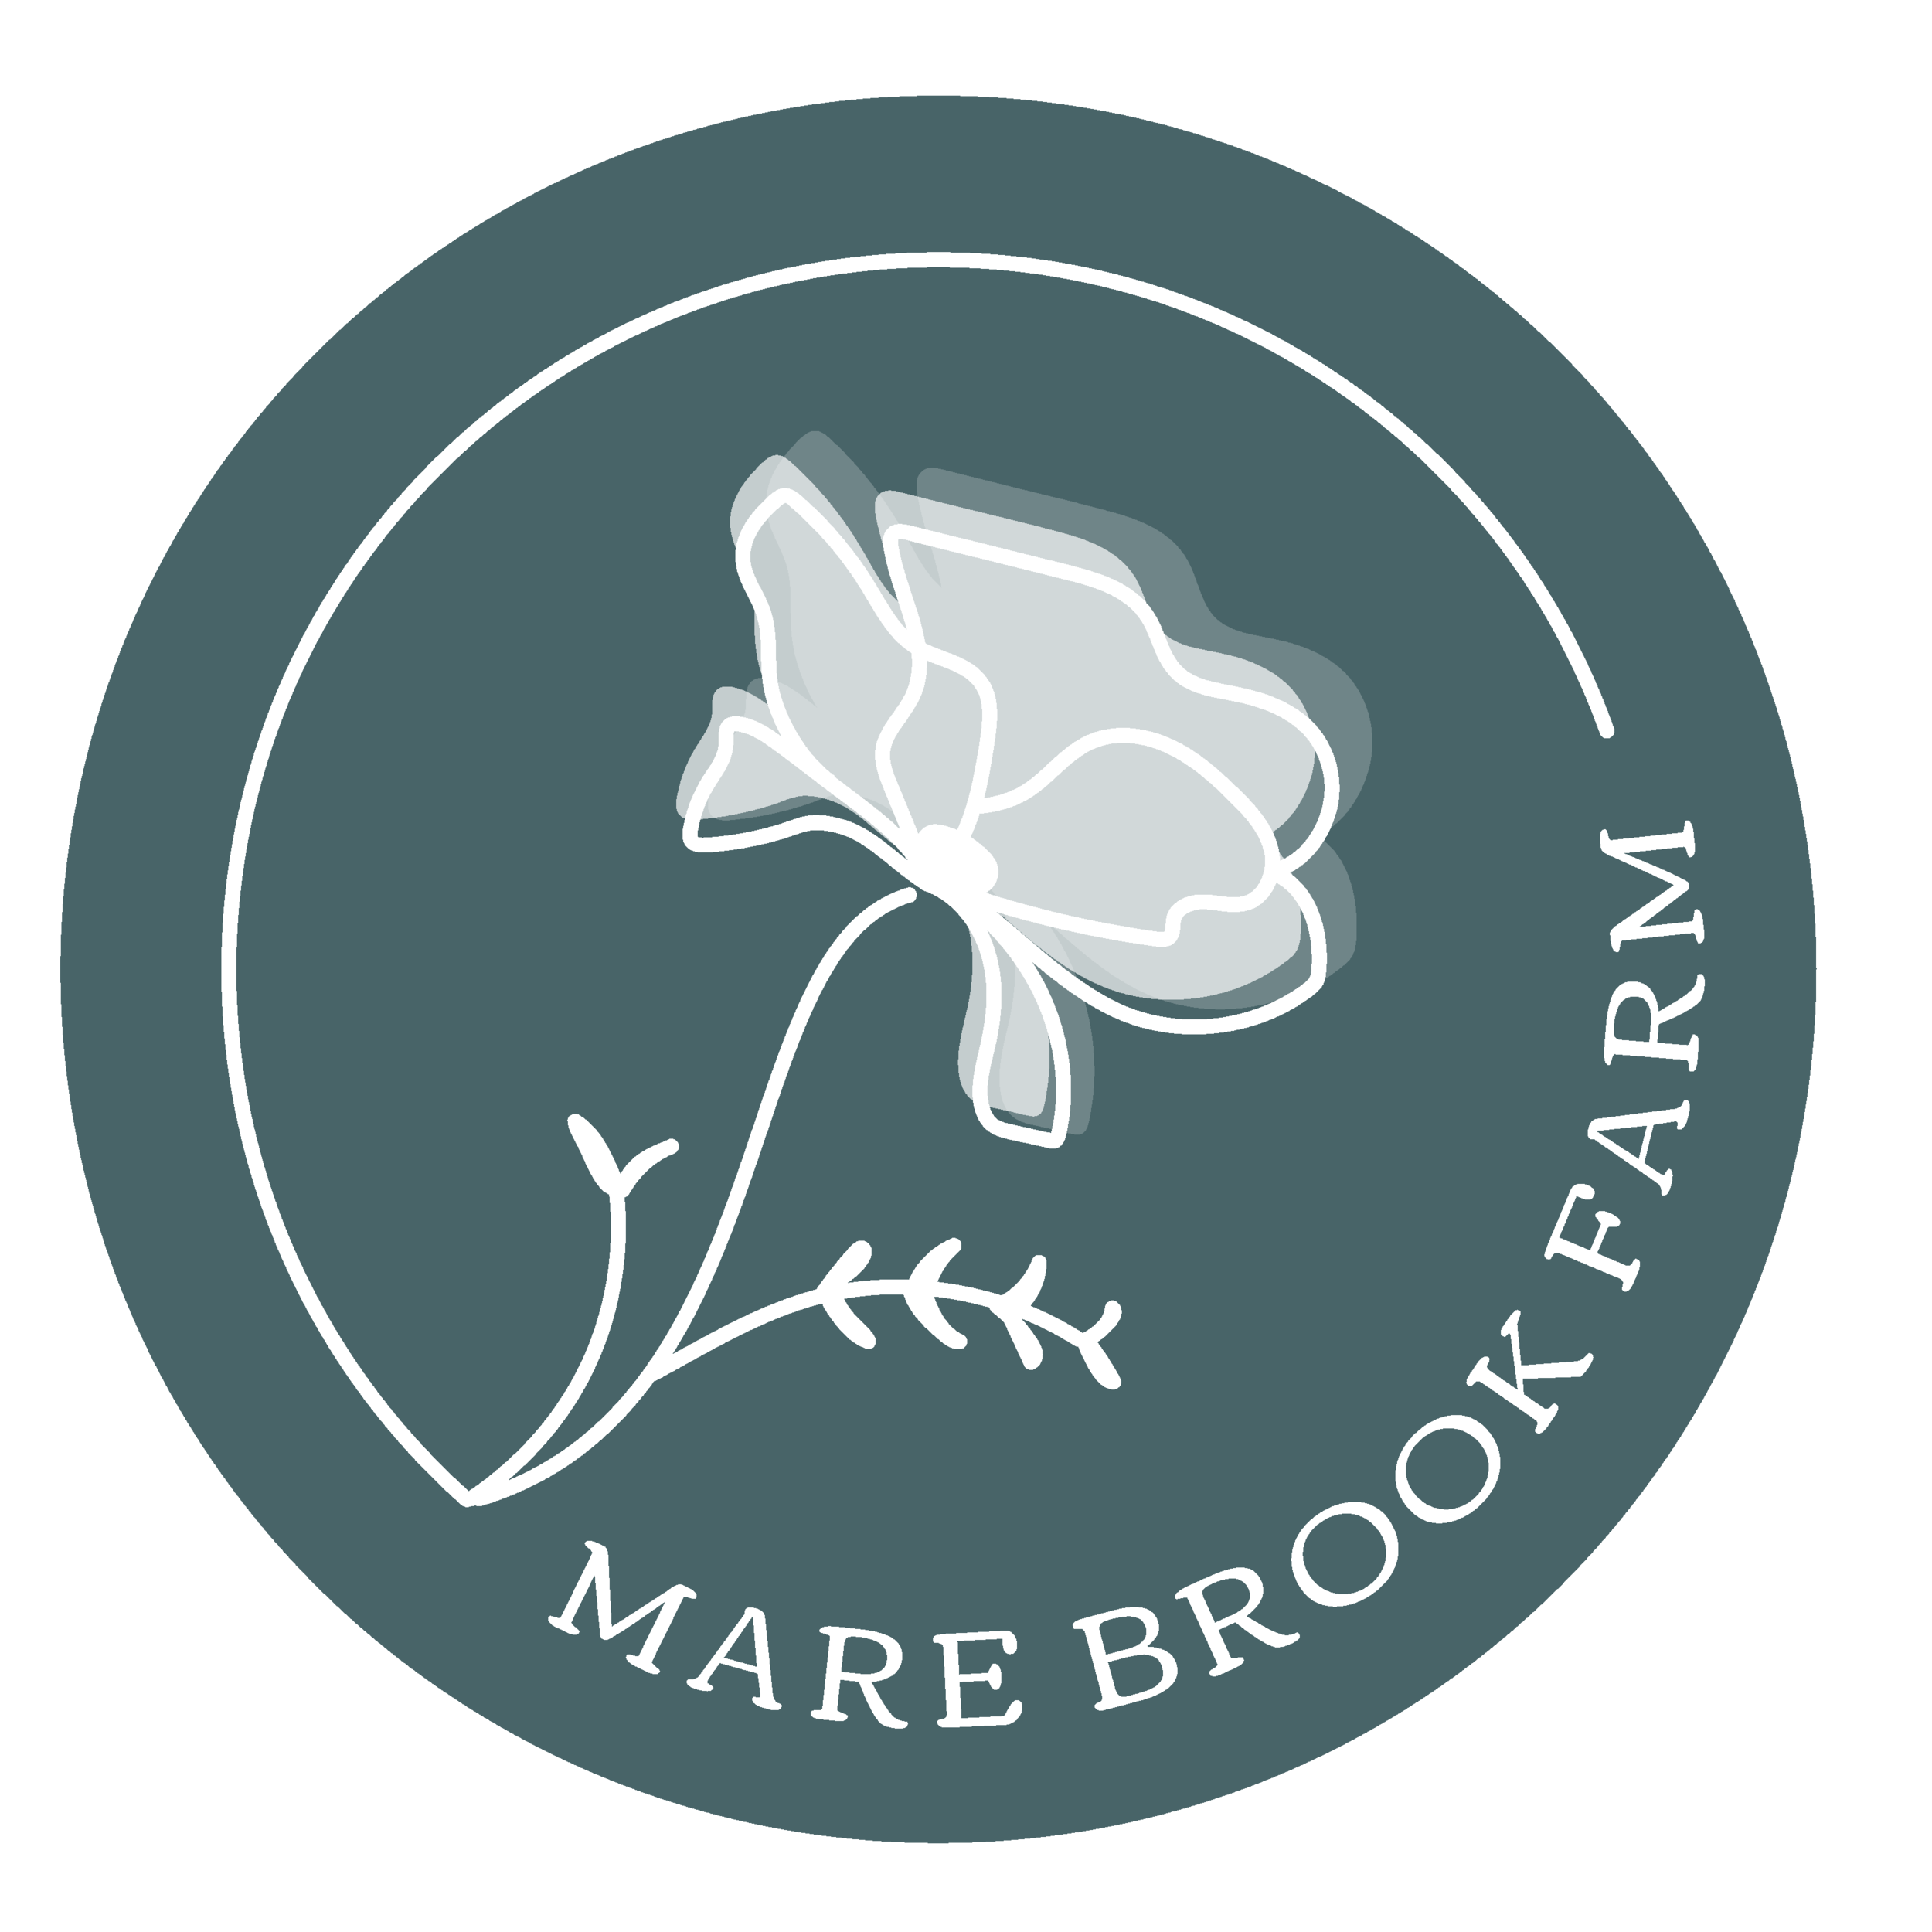 Mare Brook Farm_Badge Teal.png